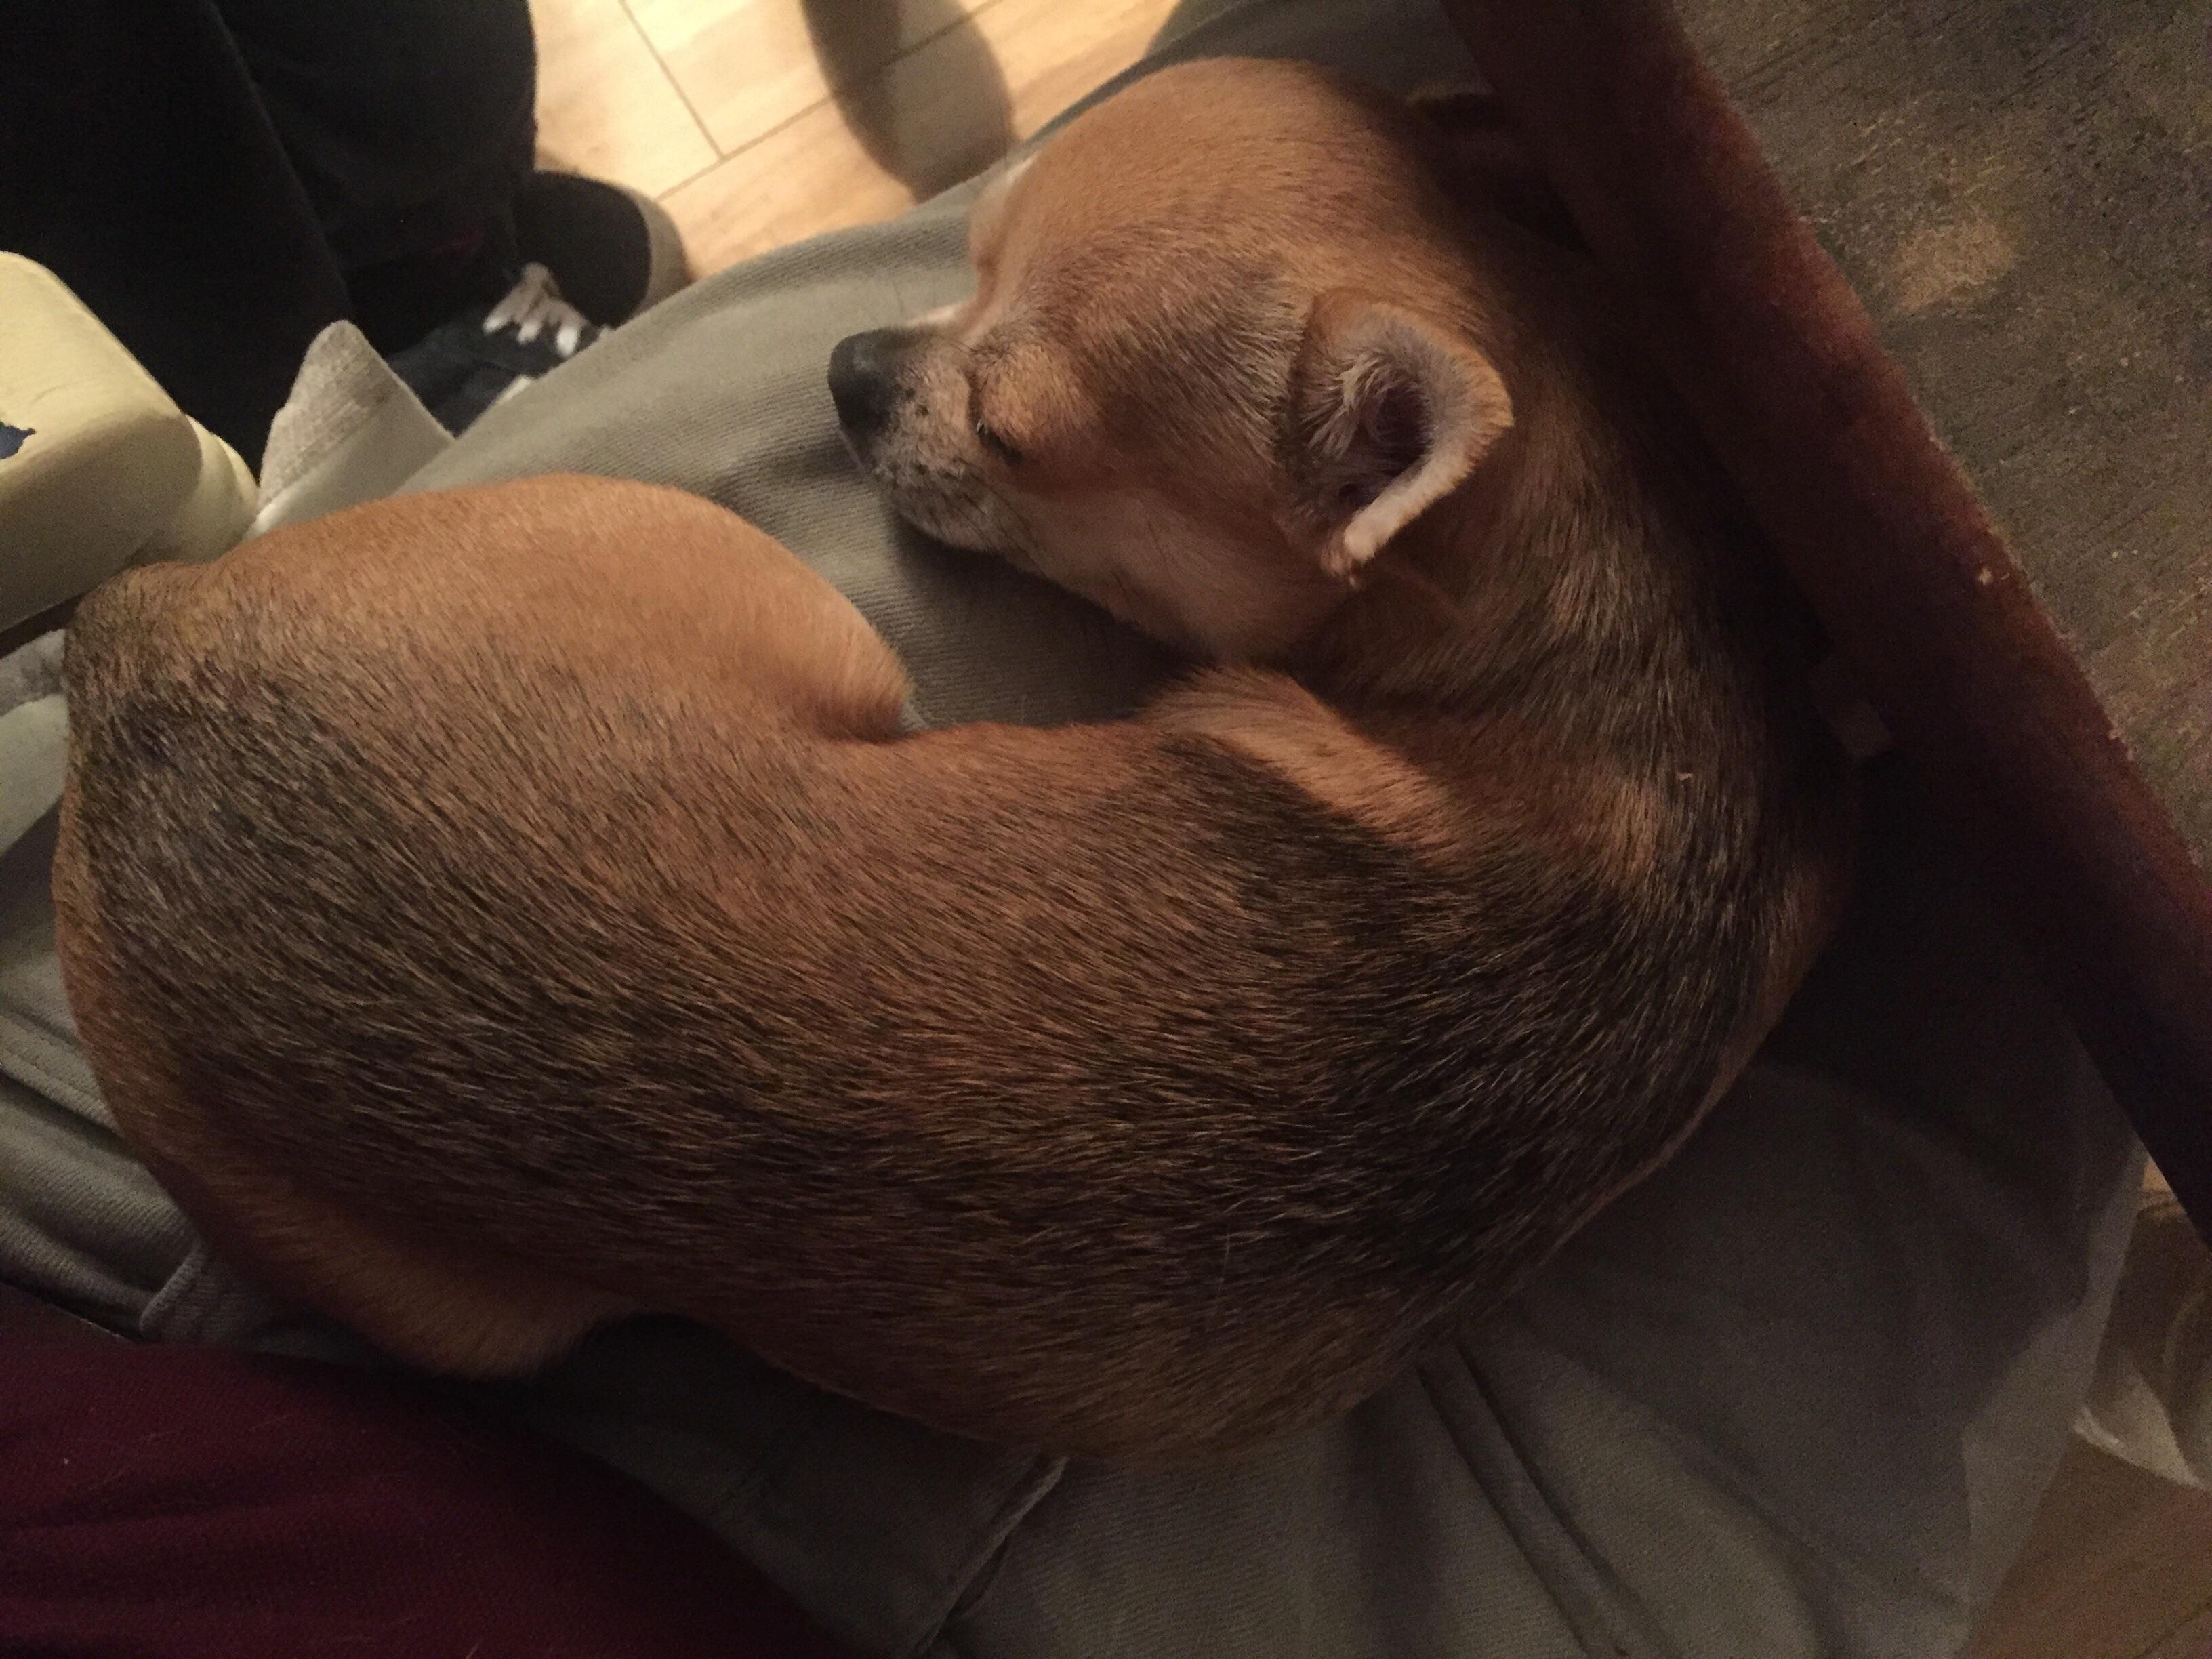 Chihuahua curled up sleeping on a mans lap